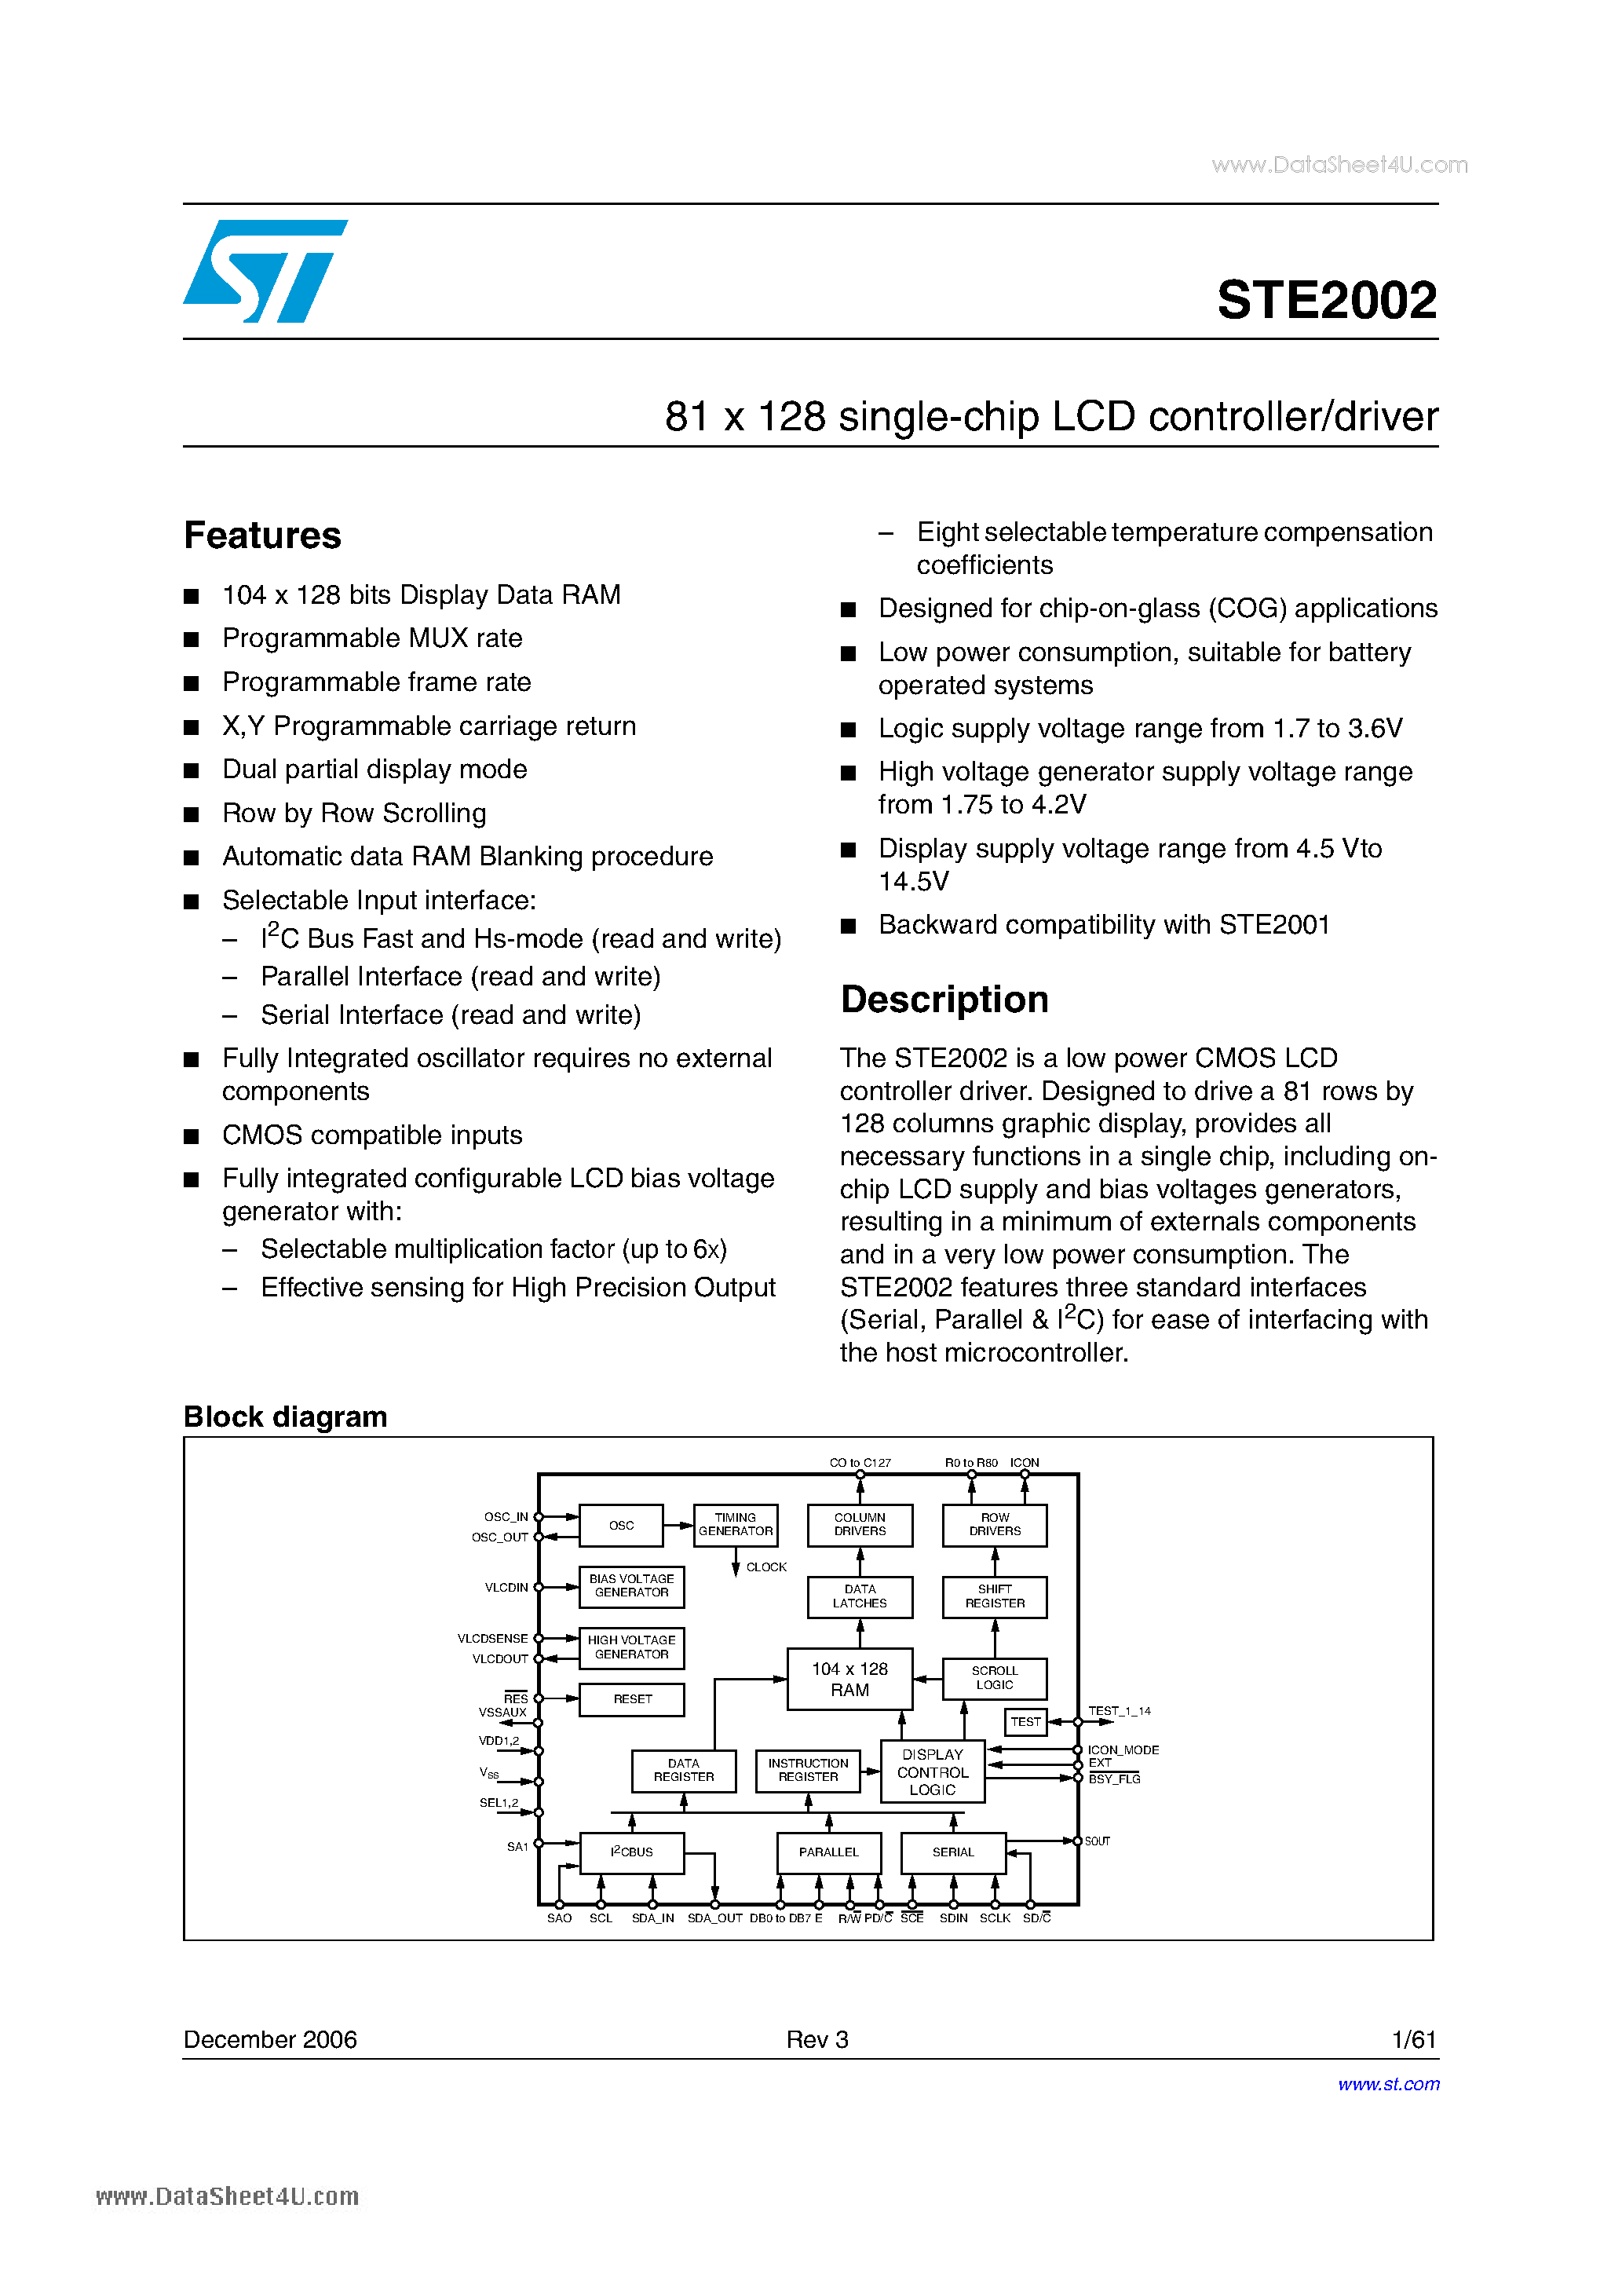 Datasheet STE2002 - 81 X 128 single-chip LCD controller/driver page 1